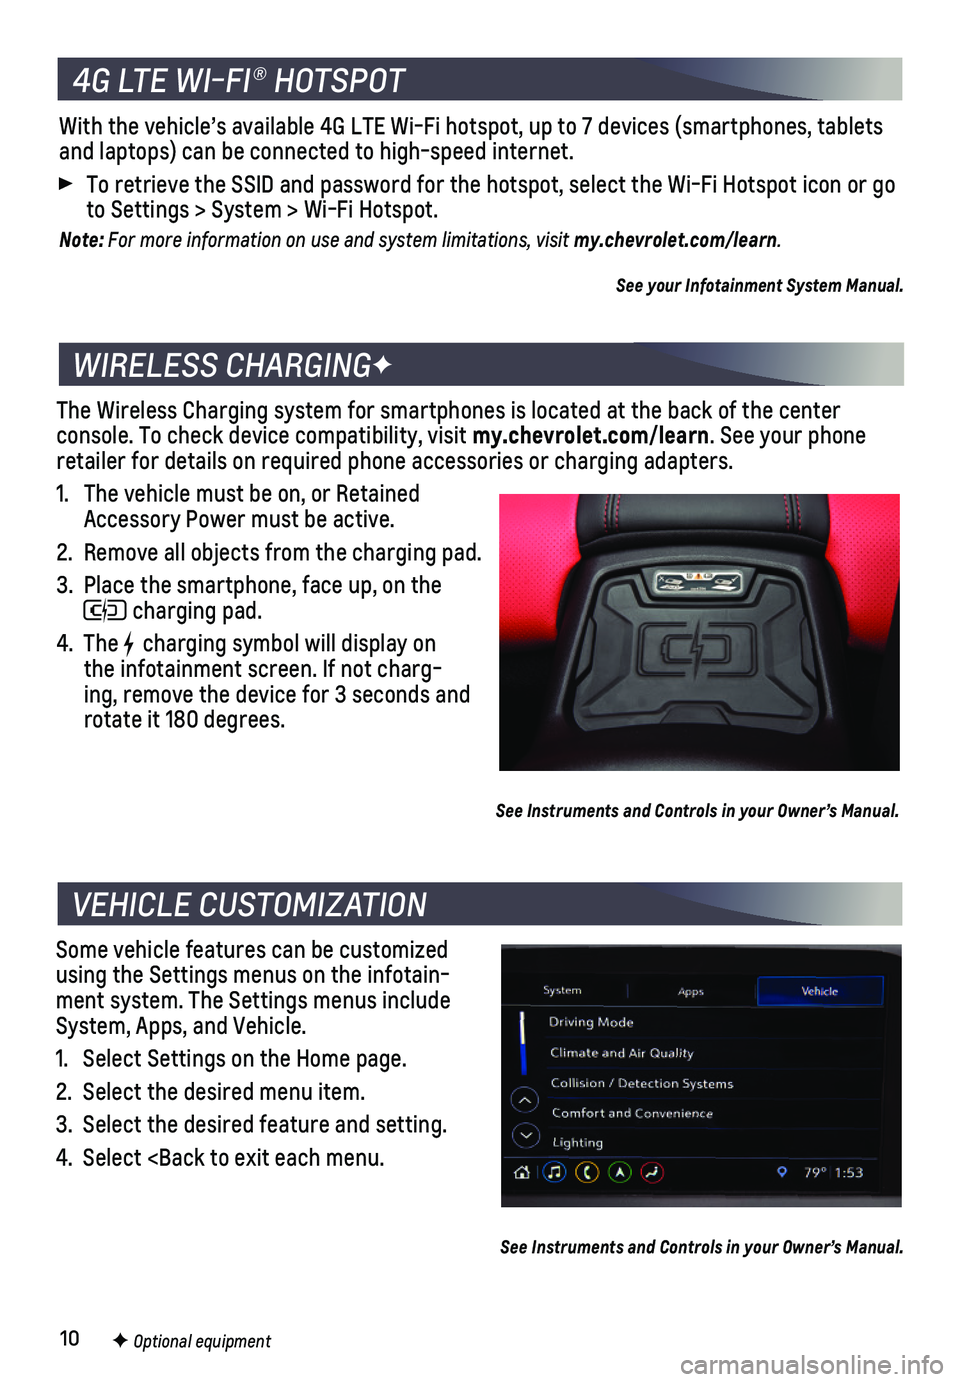 CHEVROLET CAMARO 2020  Owners Manual 10
The Wireless Charging system for smartphones is located at the back of t\
he center  
console. To check device compatibility, visit my.chevrolet.com/learn. See your phone retailer for details on re